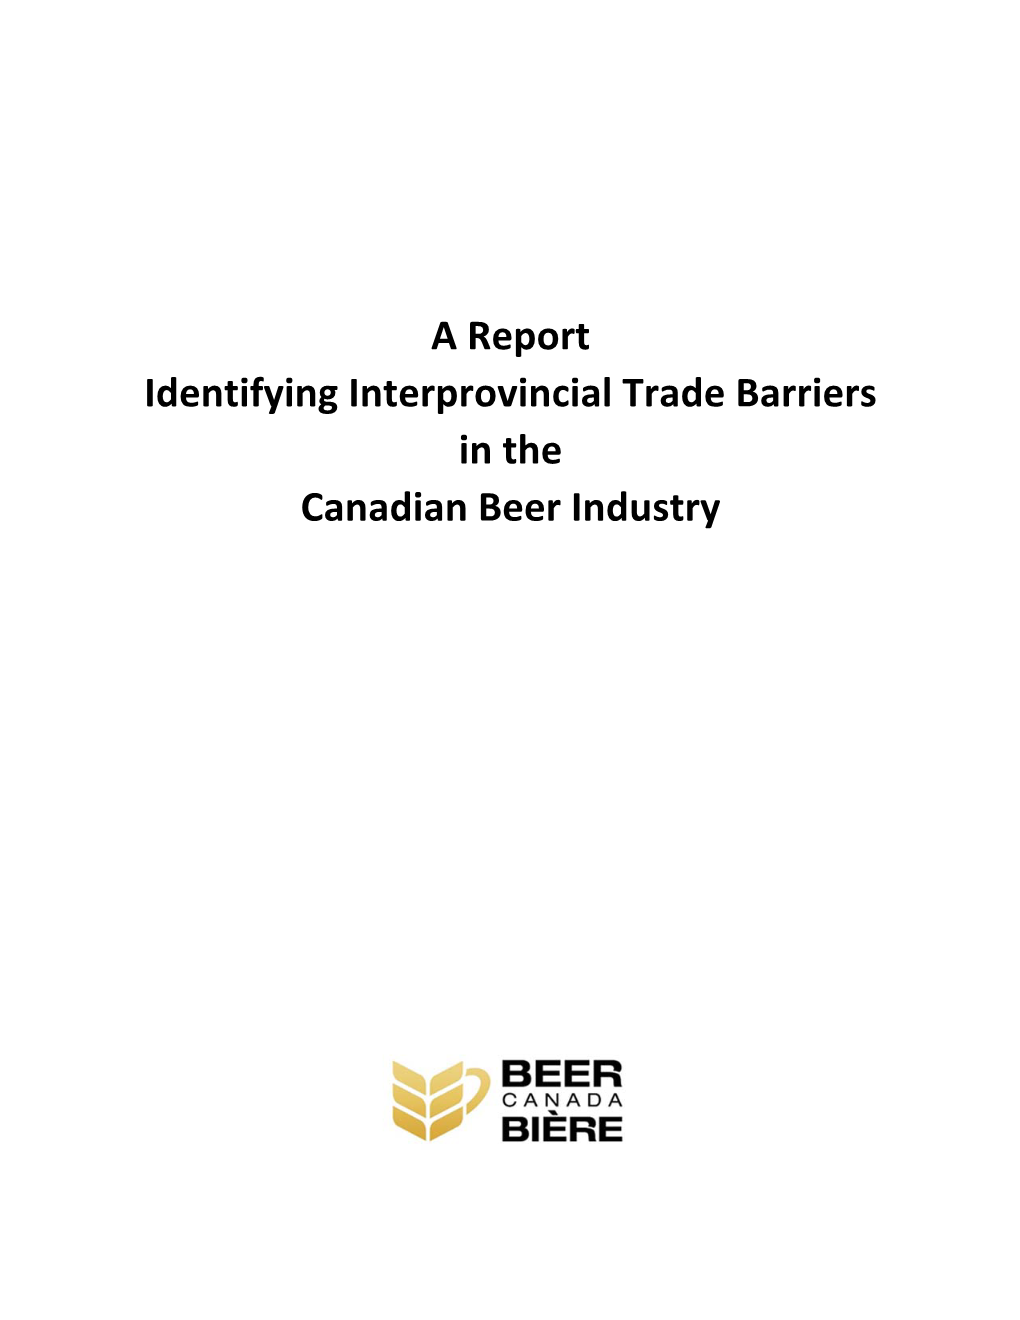 A Report Identifying Interprovincial Trade Barriers in the Canadian Beer Industry